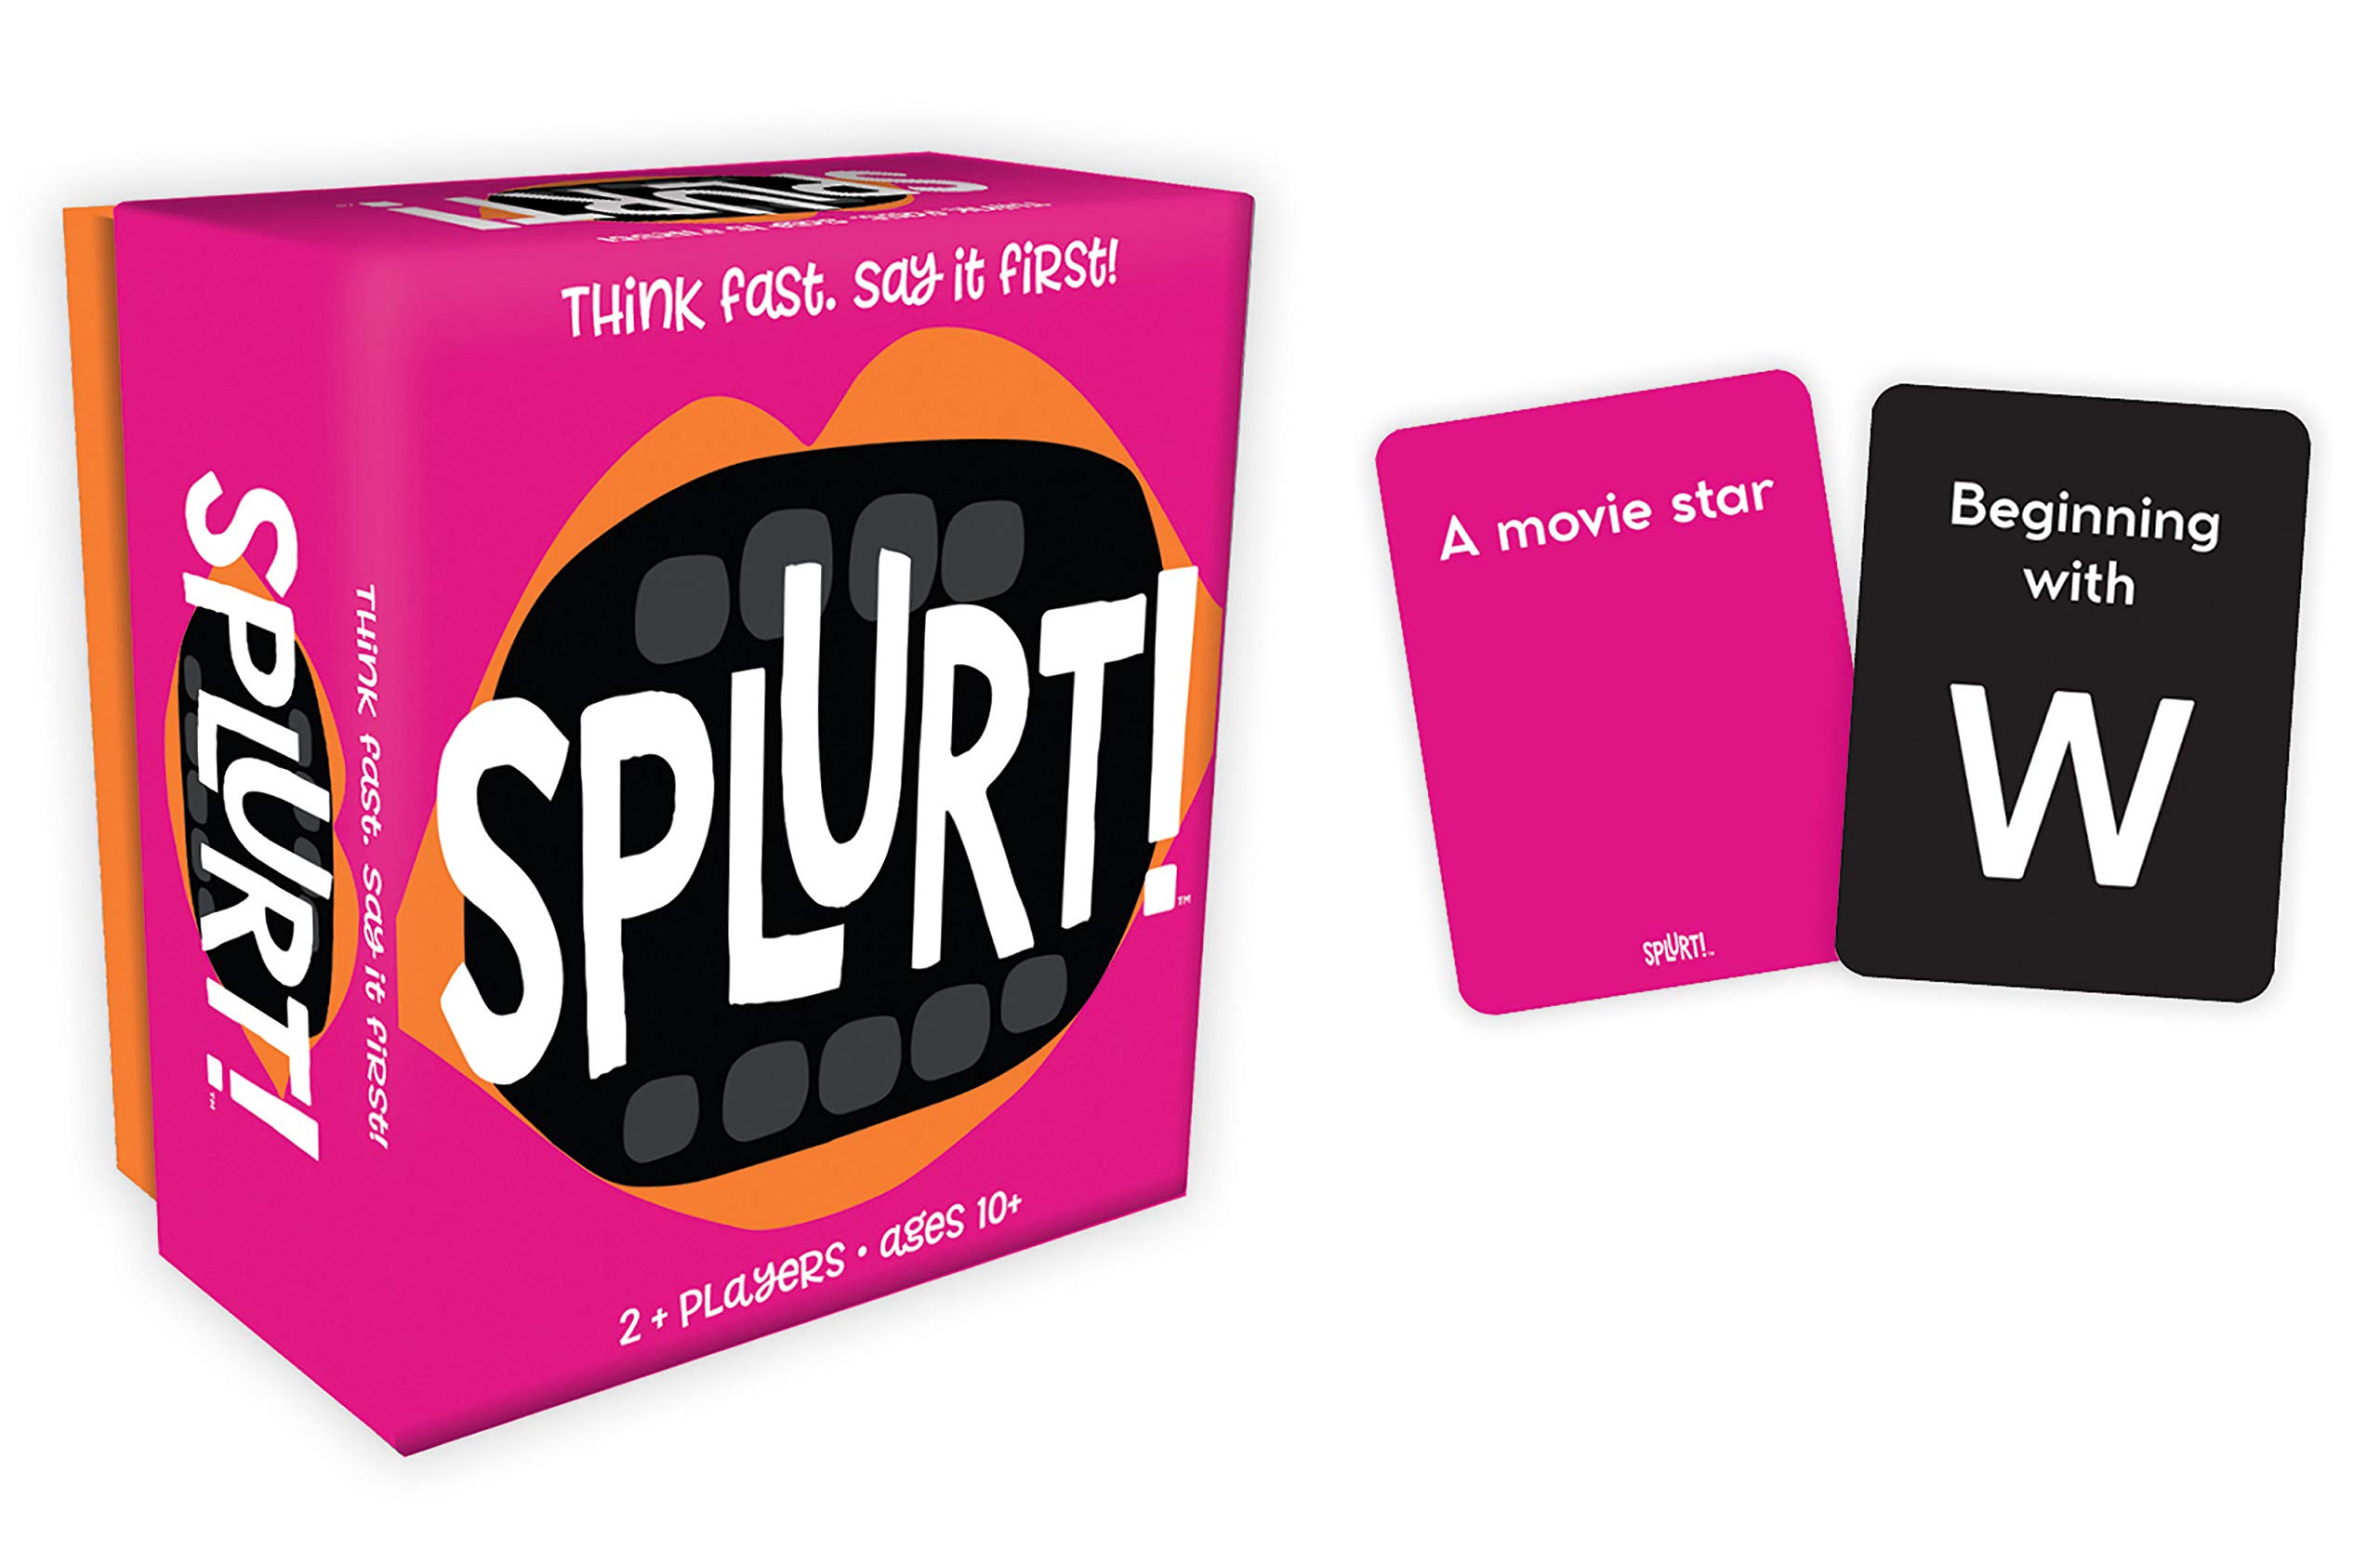 Gamewright - Splurt! - Portable Party Card Game - Think Fast. Say it First!,Pink